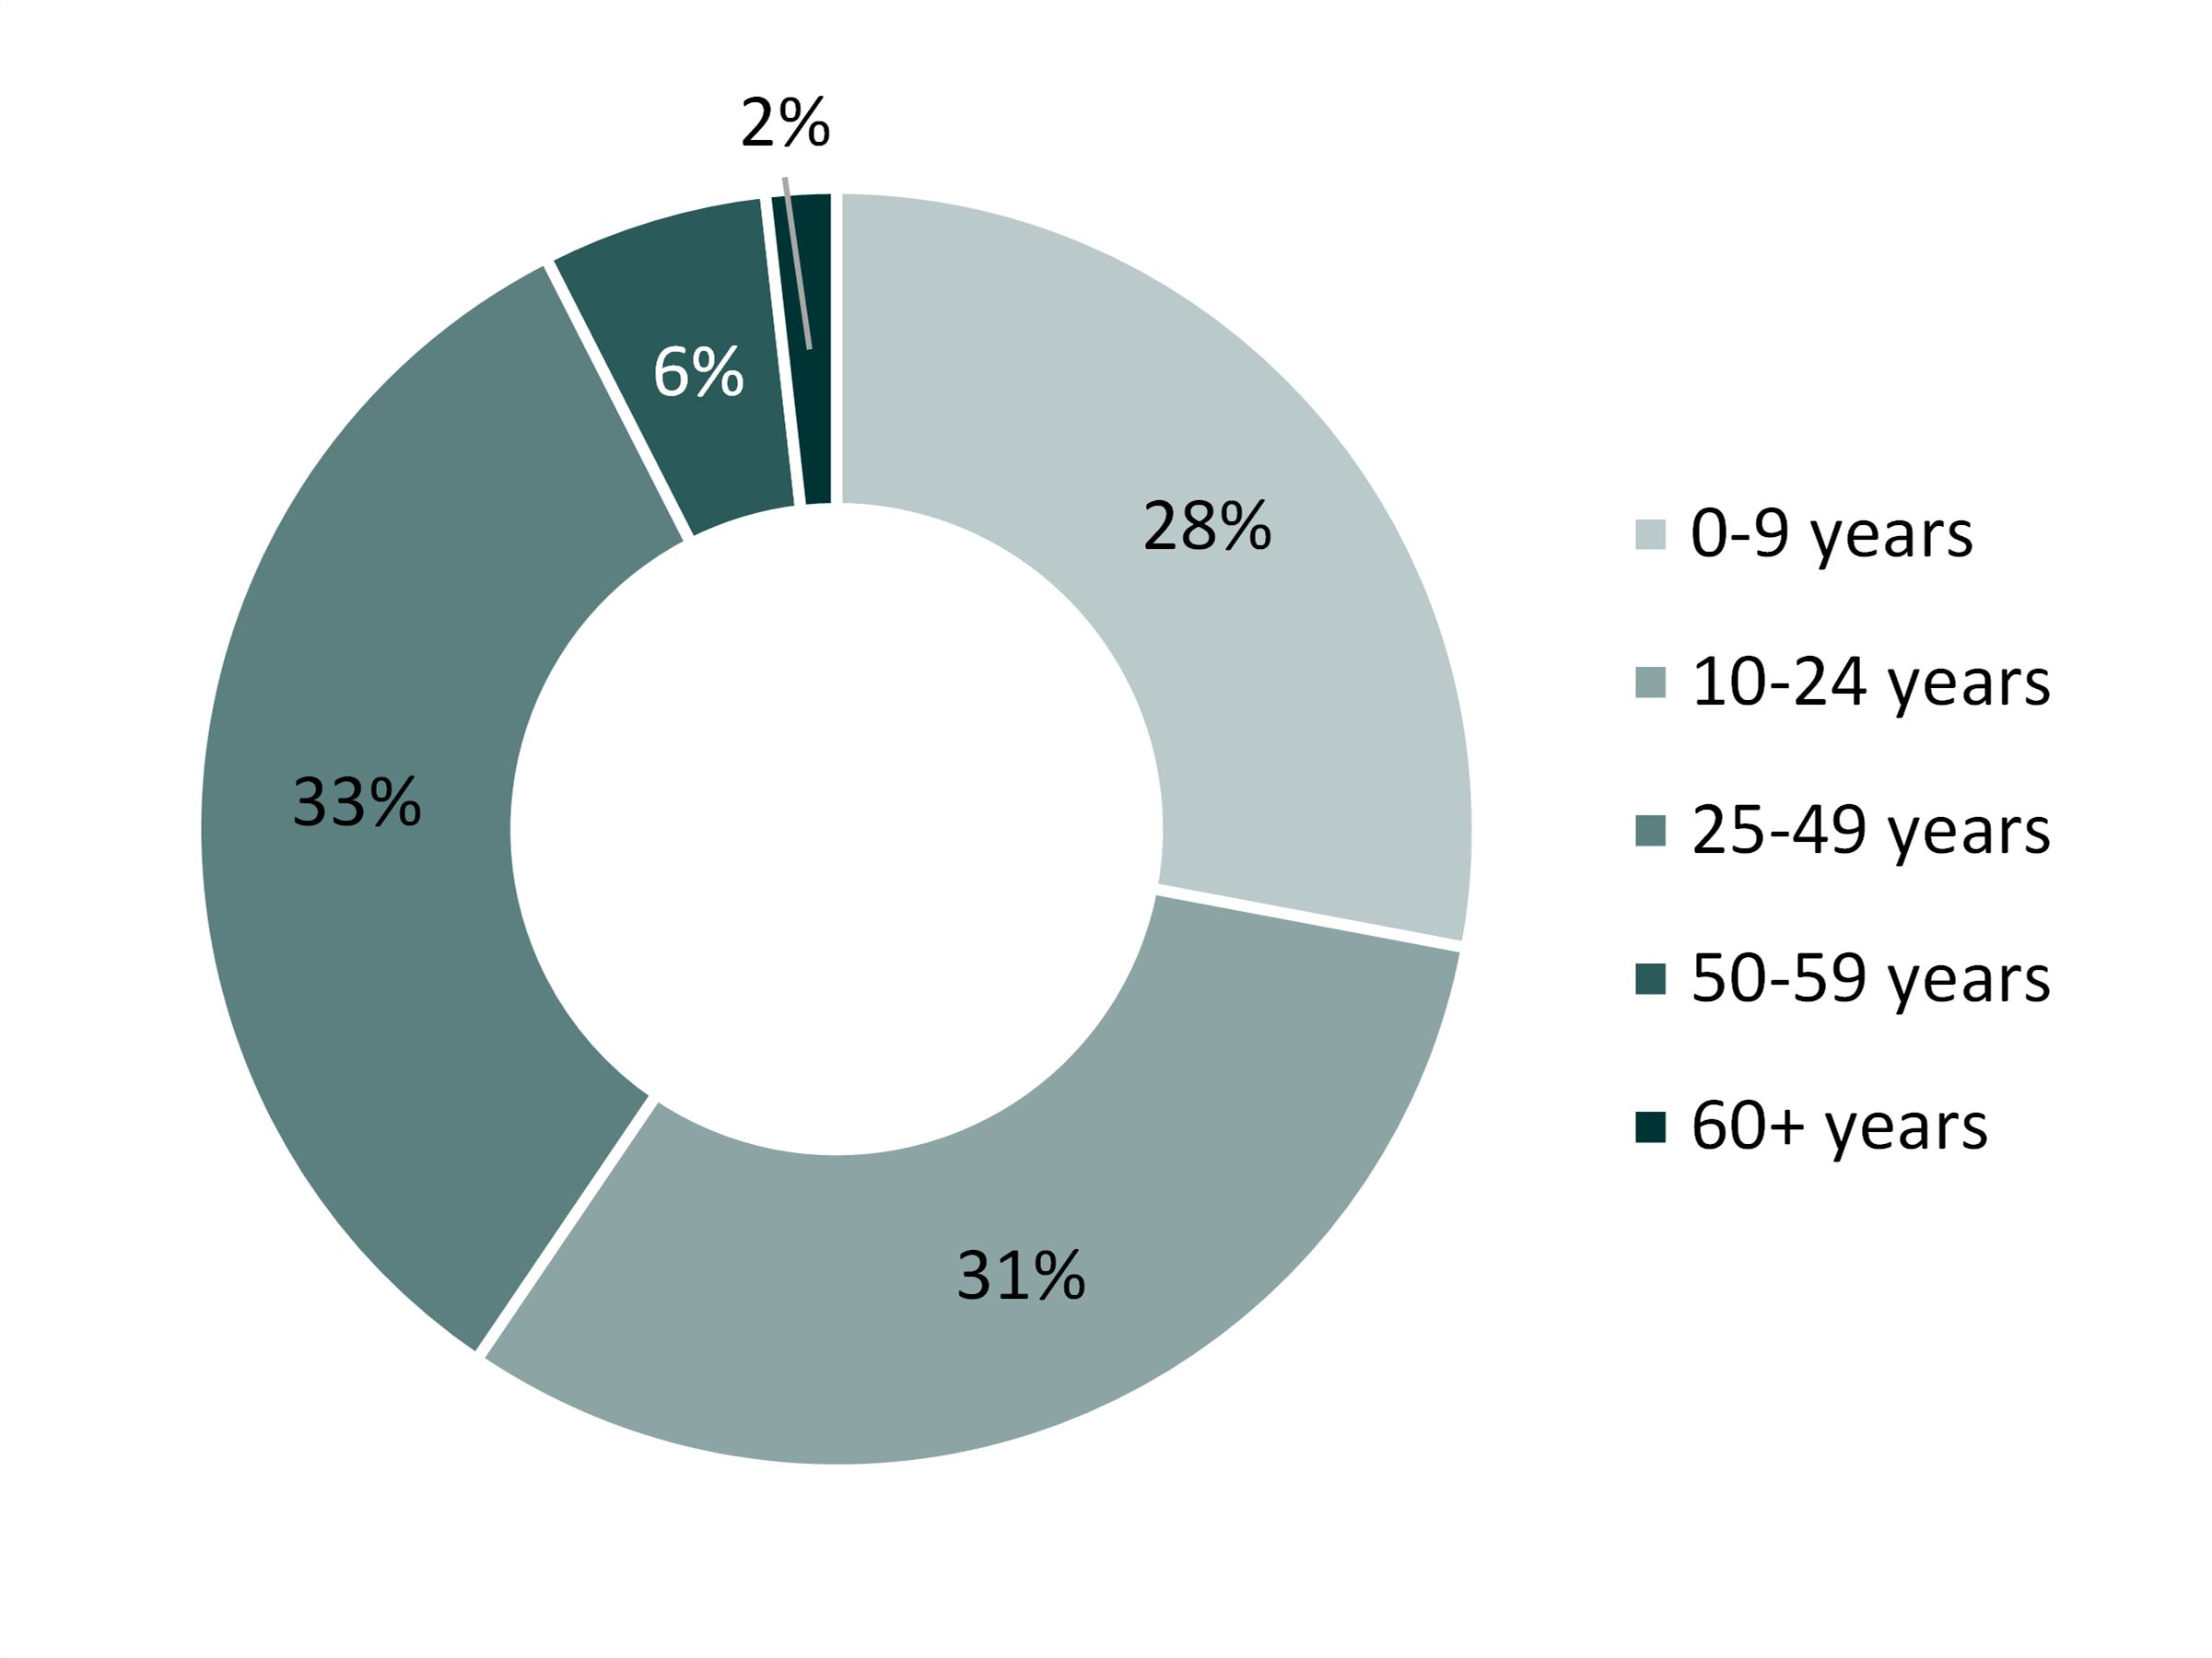 teal doughnut chart showing marital duration in the US, 2018